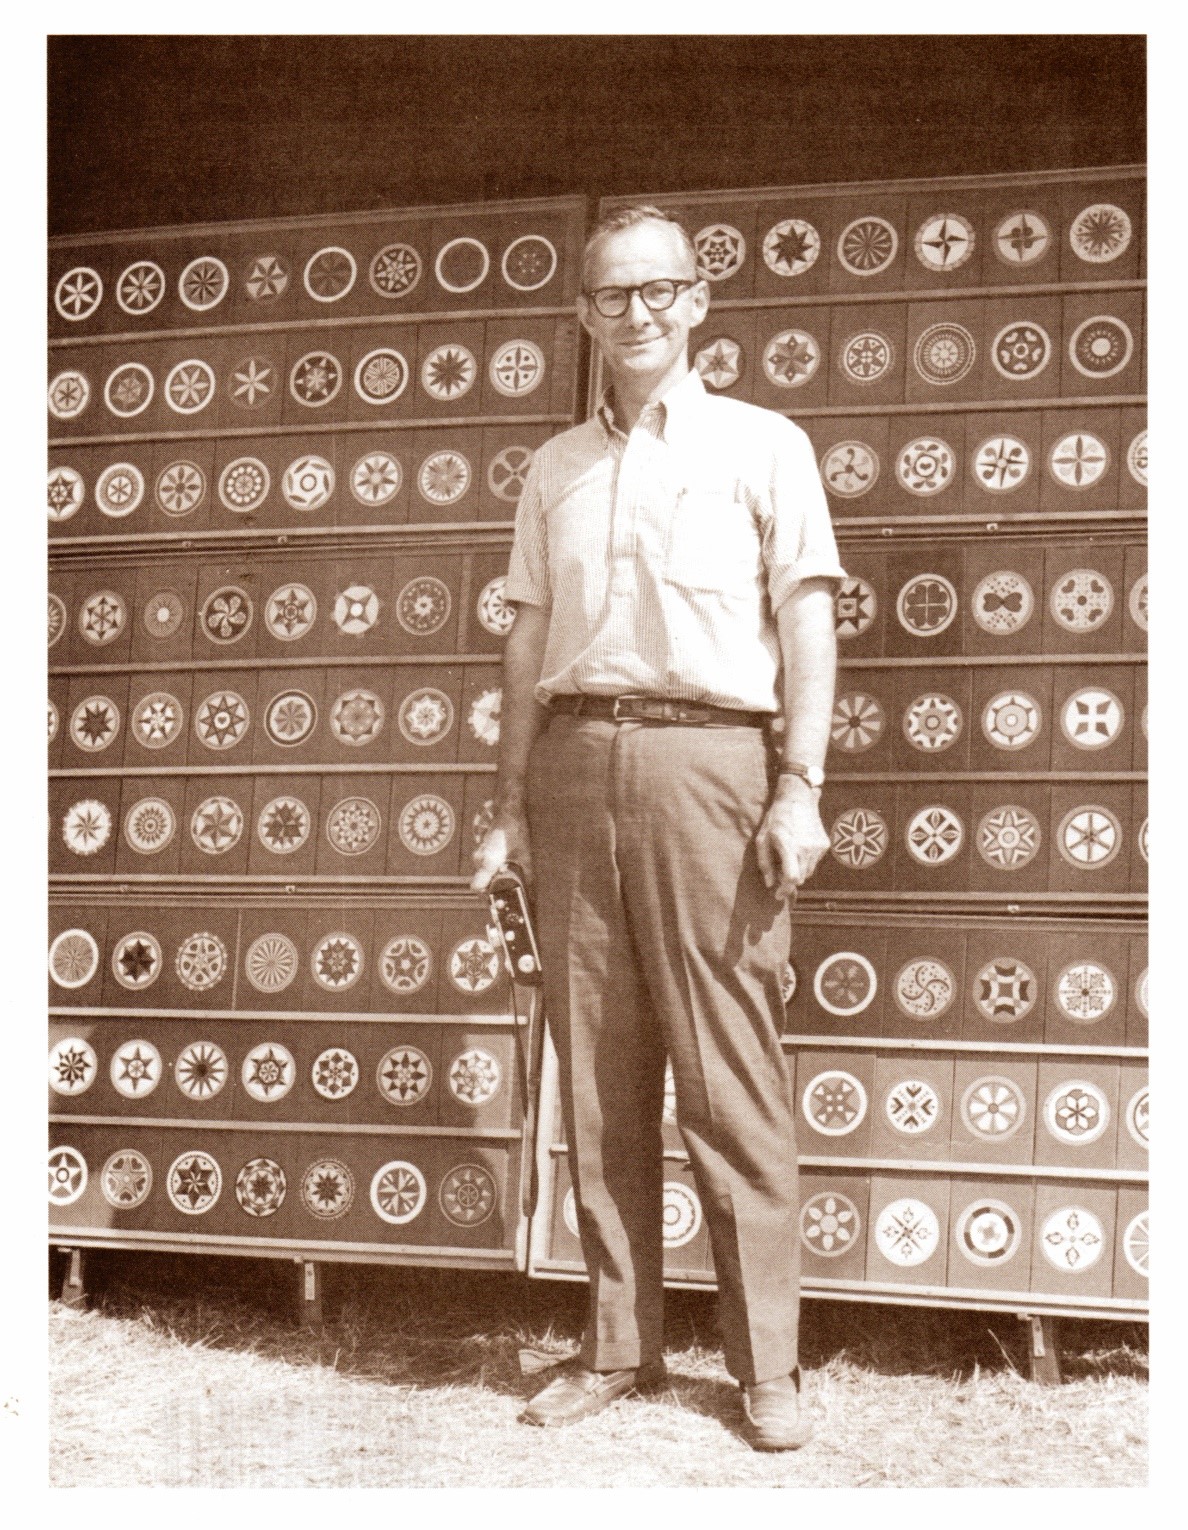 A sepia photo of a white man with white hair and dark rimmed glasses stands in front of a hex sign display. He smiles at the camera and wears a light shirt and a dark pair of pants.